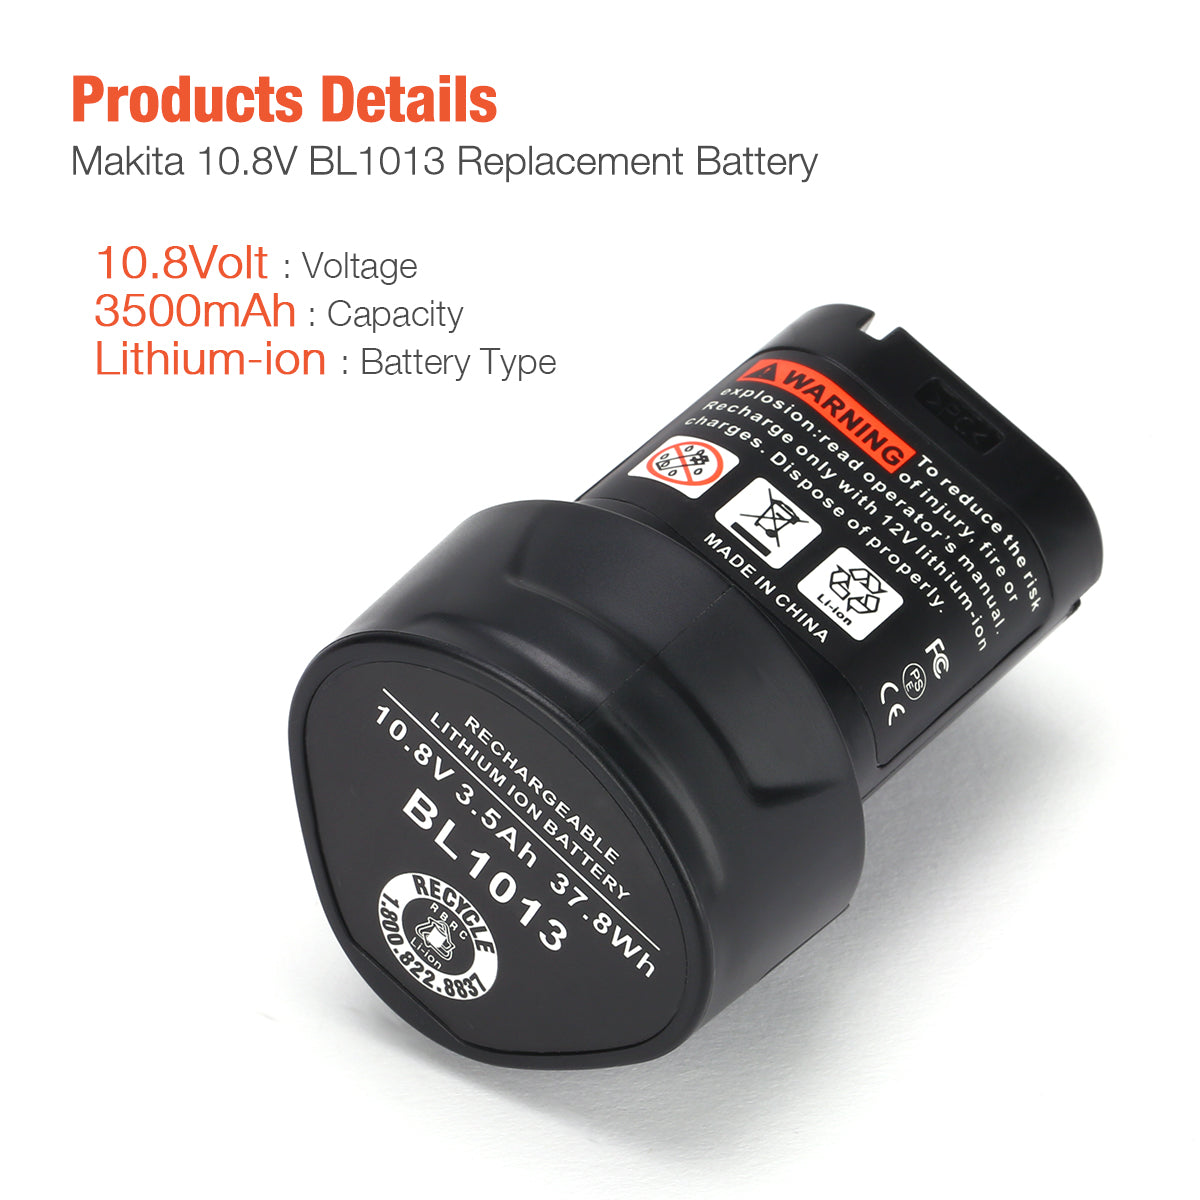 2Pack 10.8V 3500mAh Li-ion Replacement Battery For MAKITA BL1013 BL1014 194550-6 194551-4 195332-9